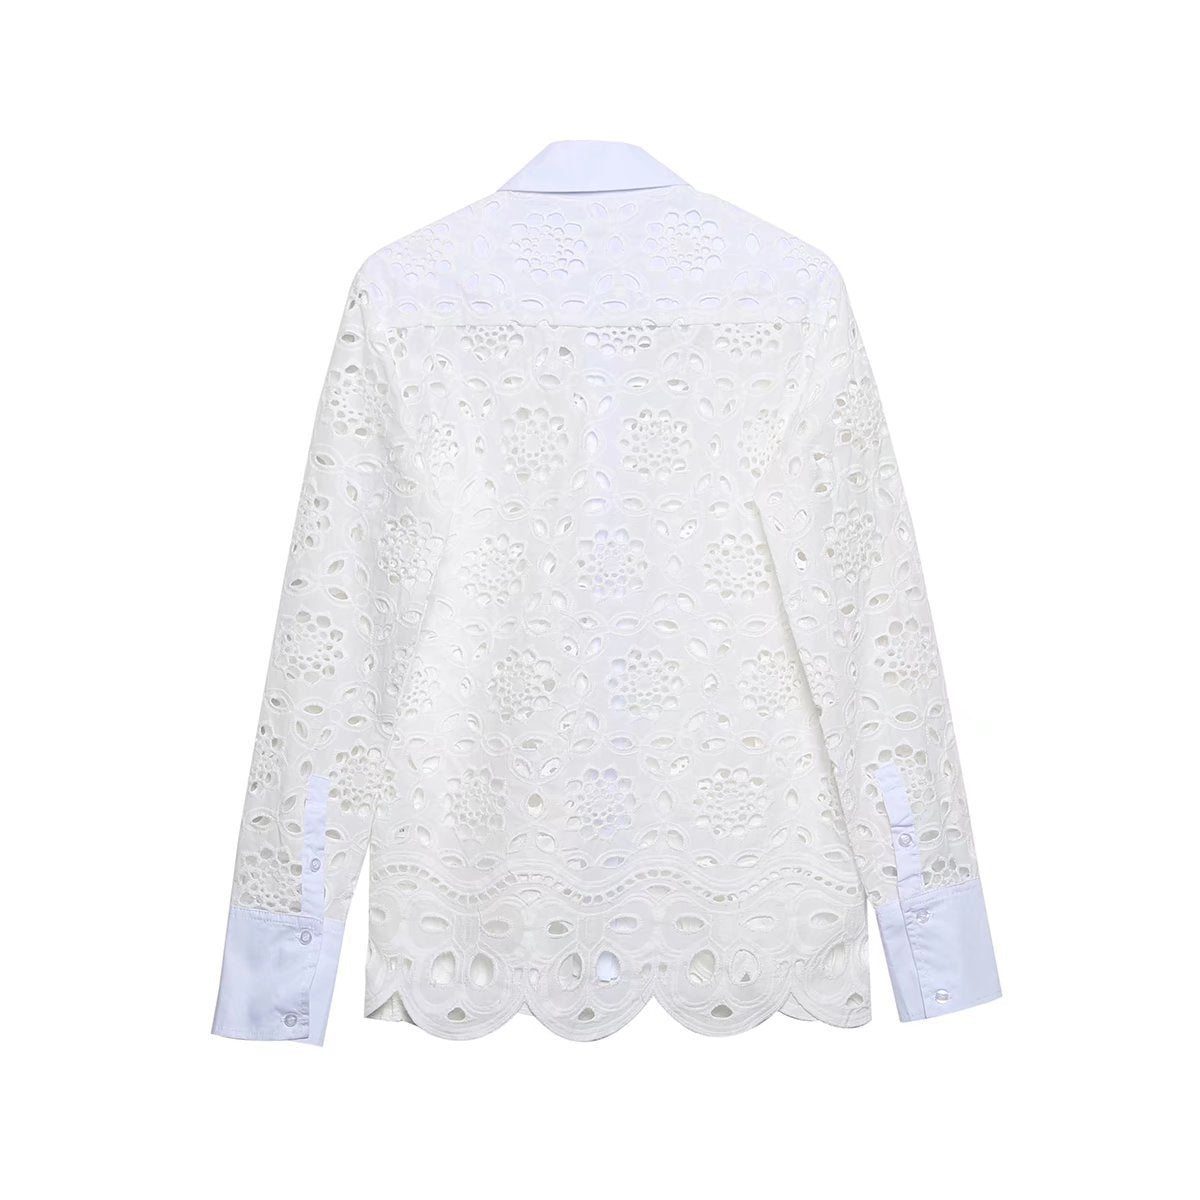 Temperament Leisure Summer New Foreign Trade Embroidery Openwork Blouse Skirt Two-piece Suit Fashion Leisure Suit